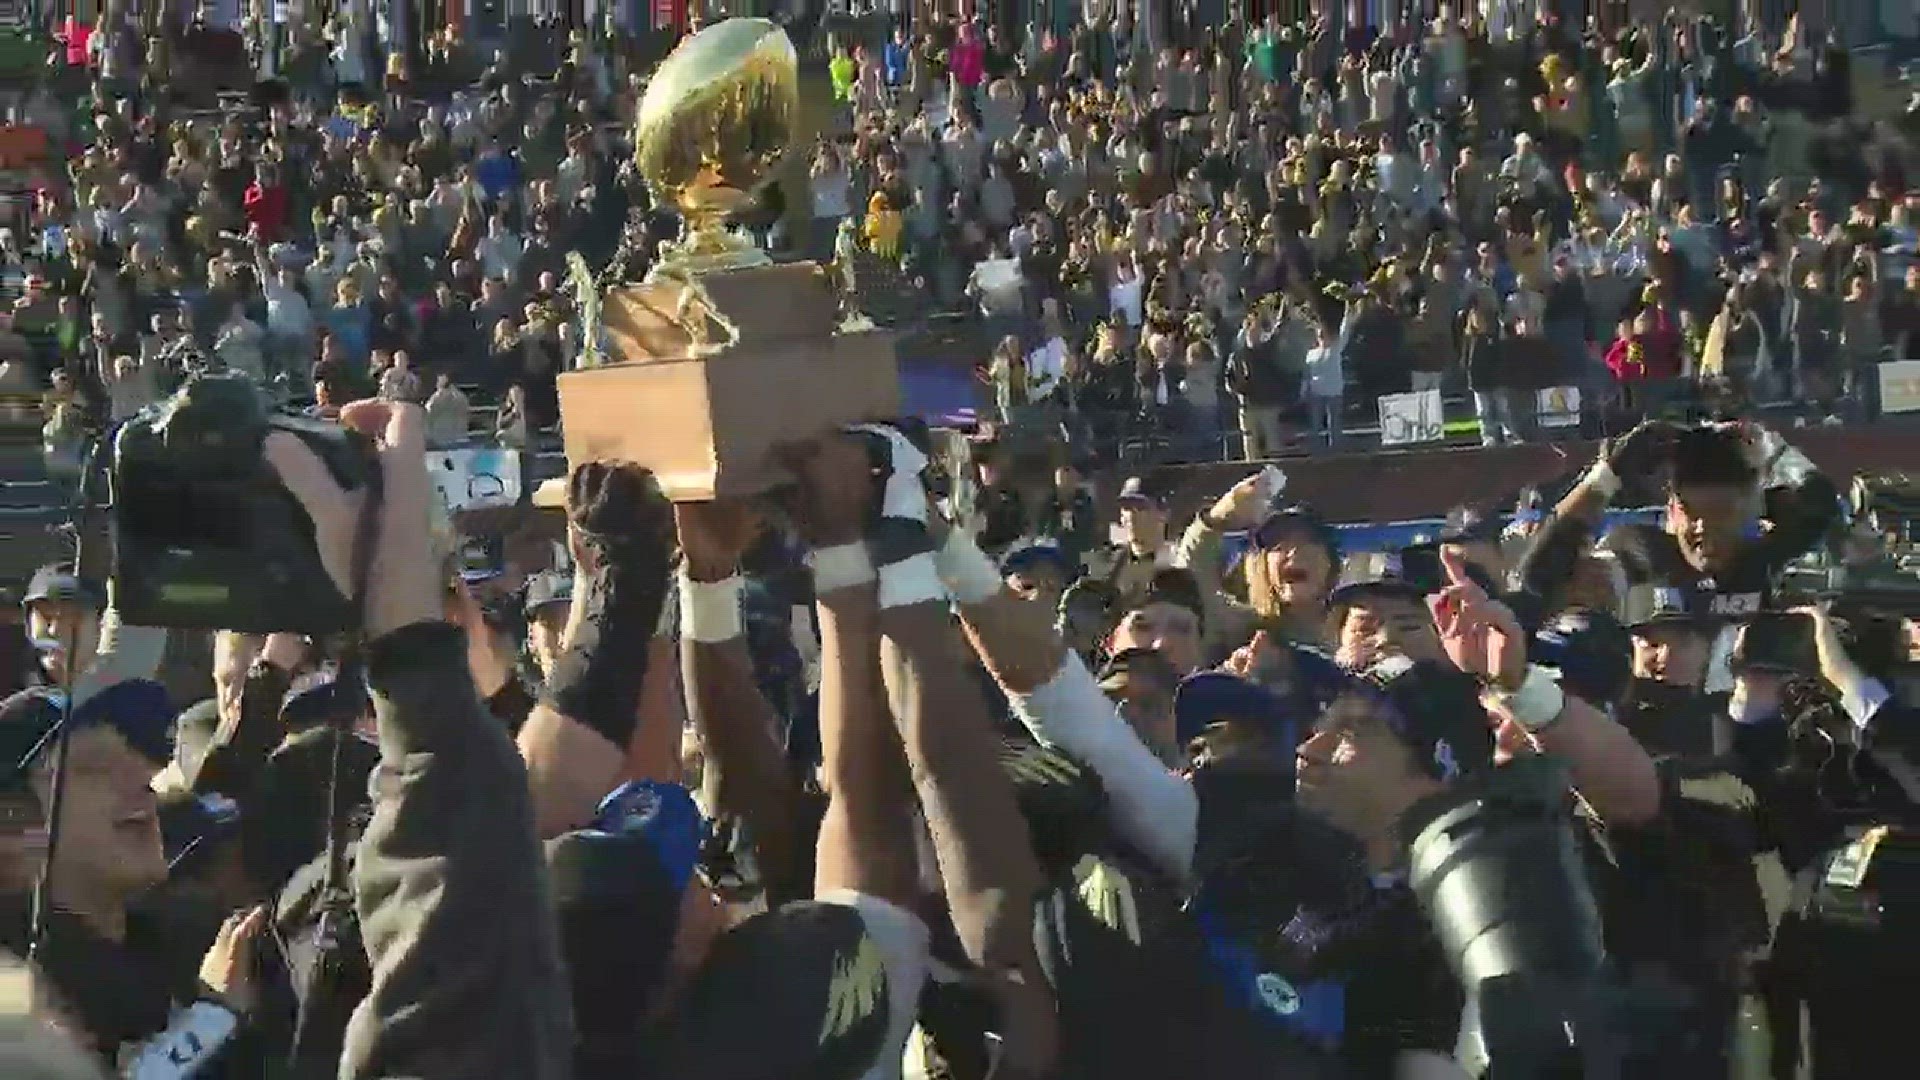 Led by former Powell head coach Derek Rang, the Dresden Lions lift the gold ball, winning their first state championship after beating Greenback 62-27 in the 1A title game.